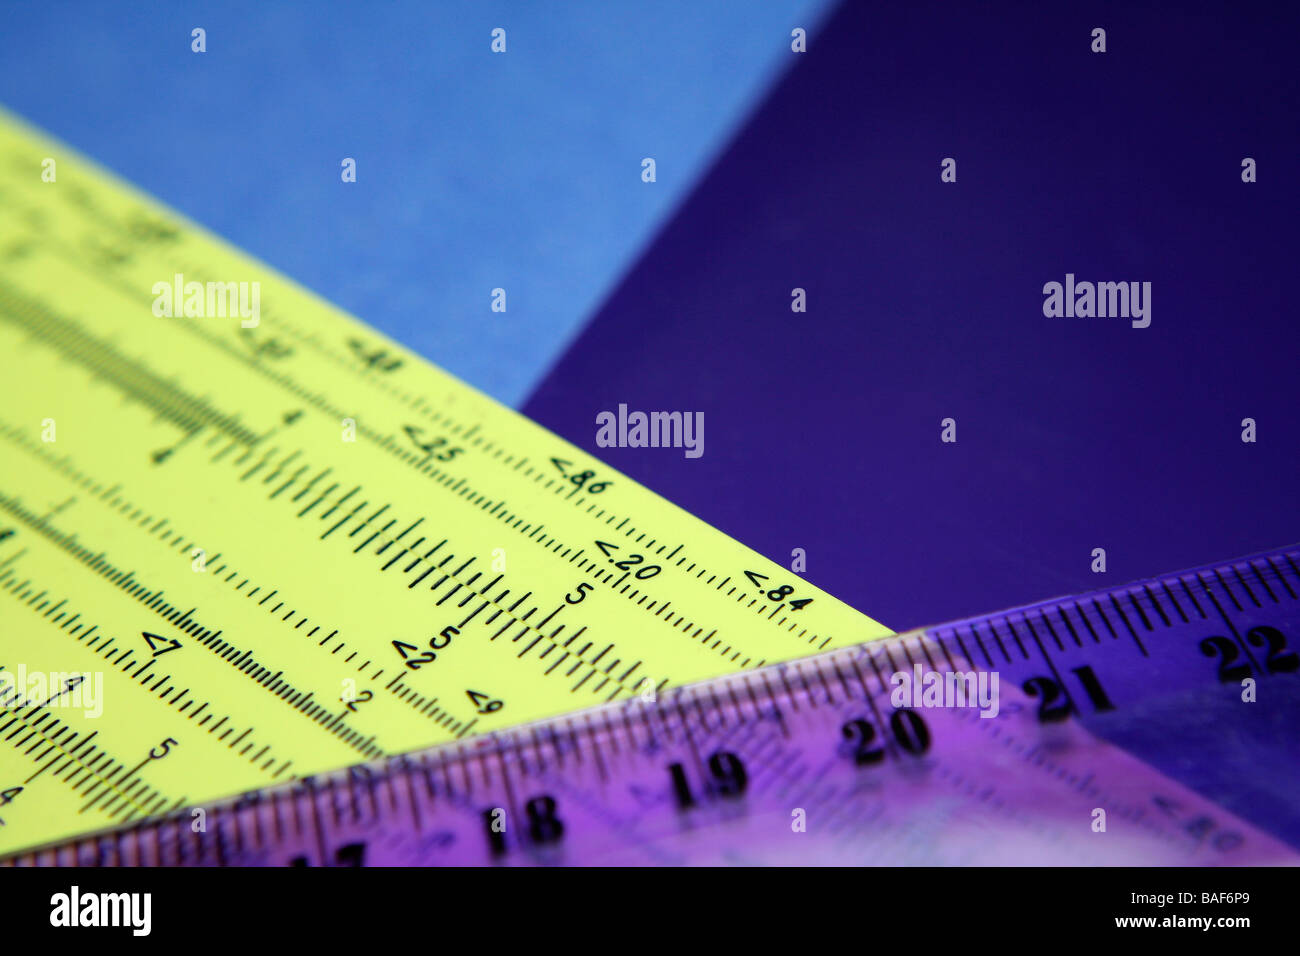 Scientific numbers on slide rule and ruler, abstract Stock Photo